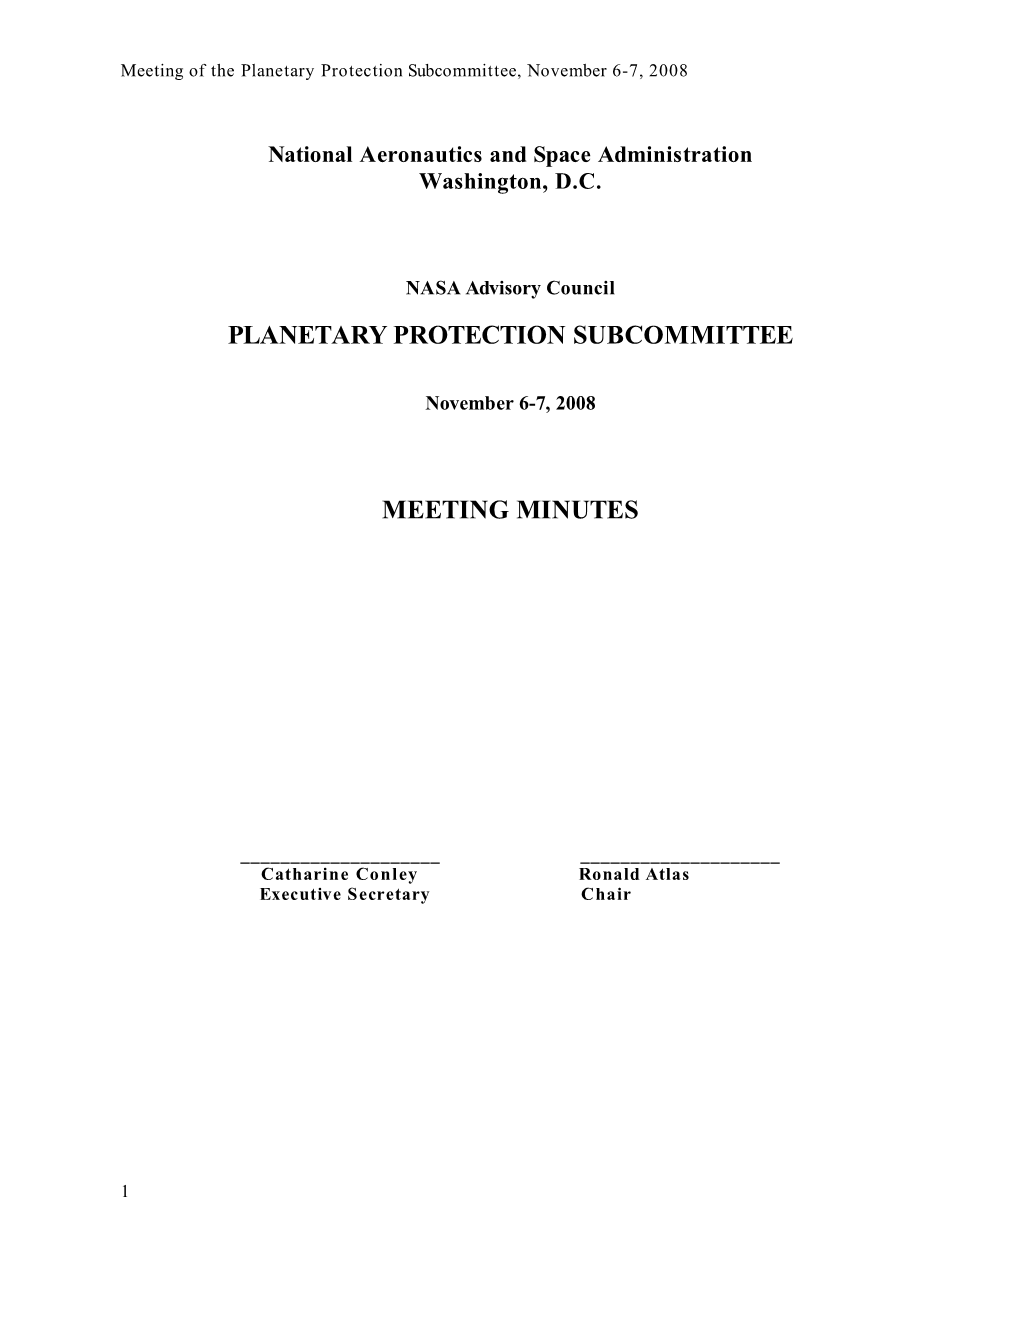 Planetary Protection Subcommittee Meeting Minutes